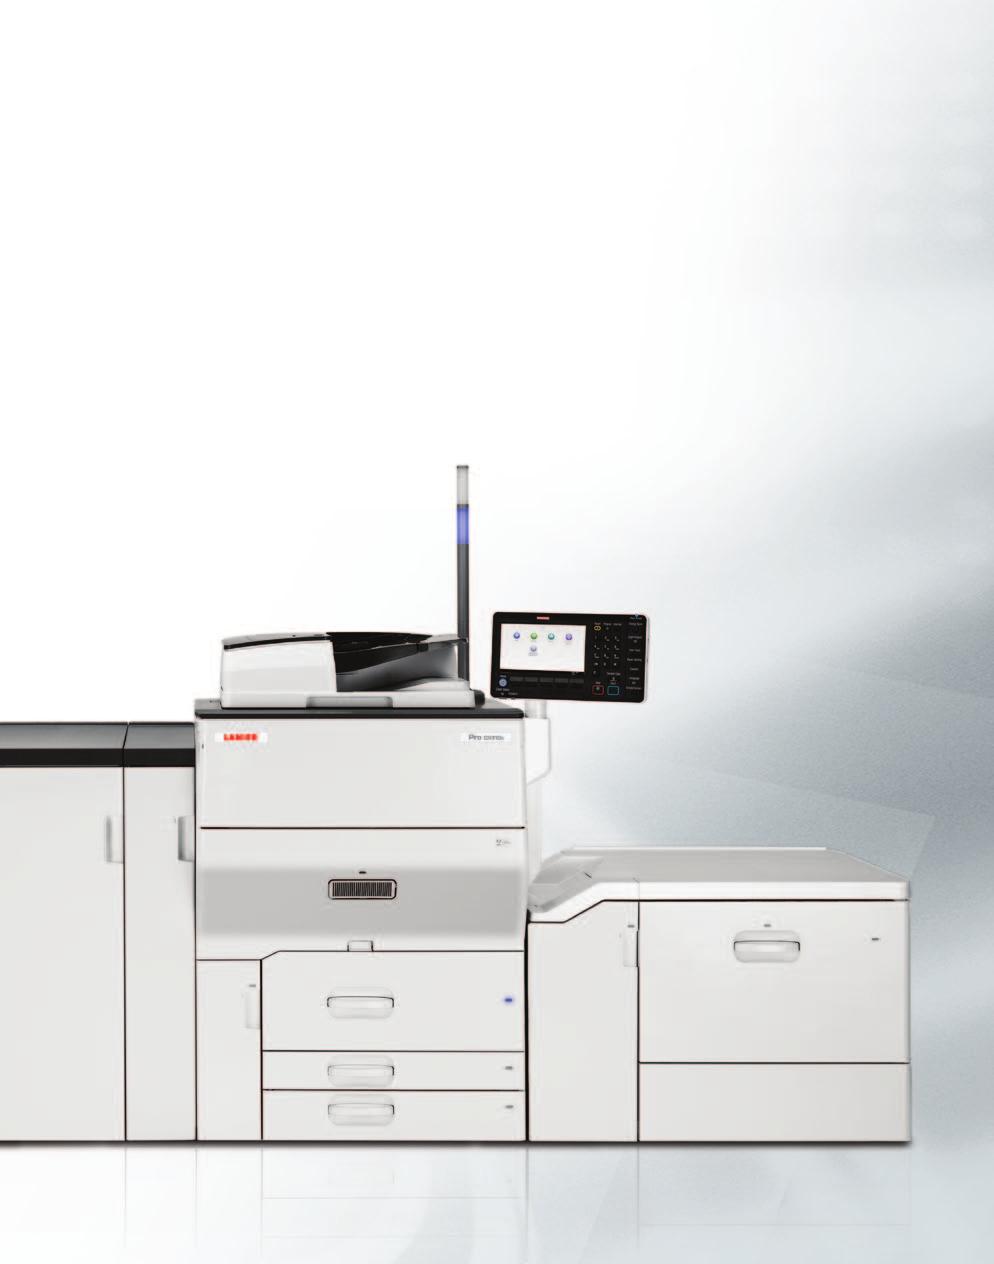 See where productivity meets affordability Designed specifically for high-quality, low-cost output in production environments, the SAVIN Pro C5100s/C5110s color digital printer combines incredible